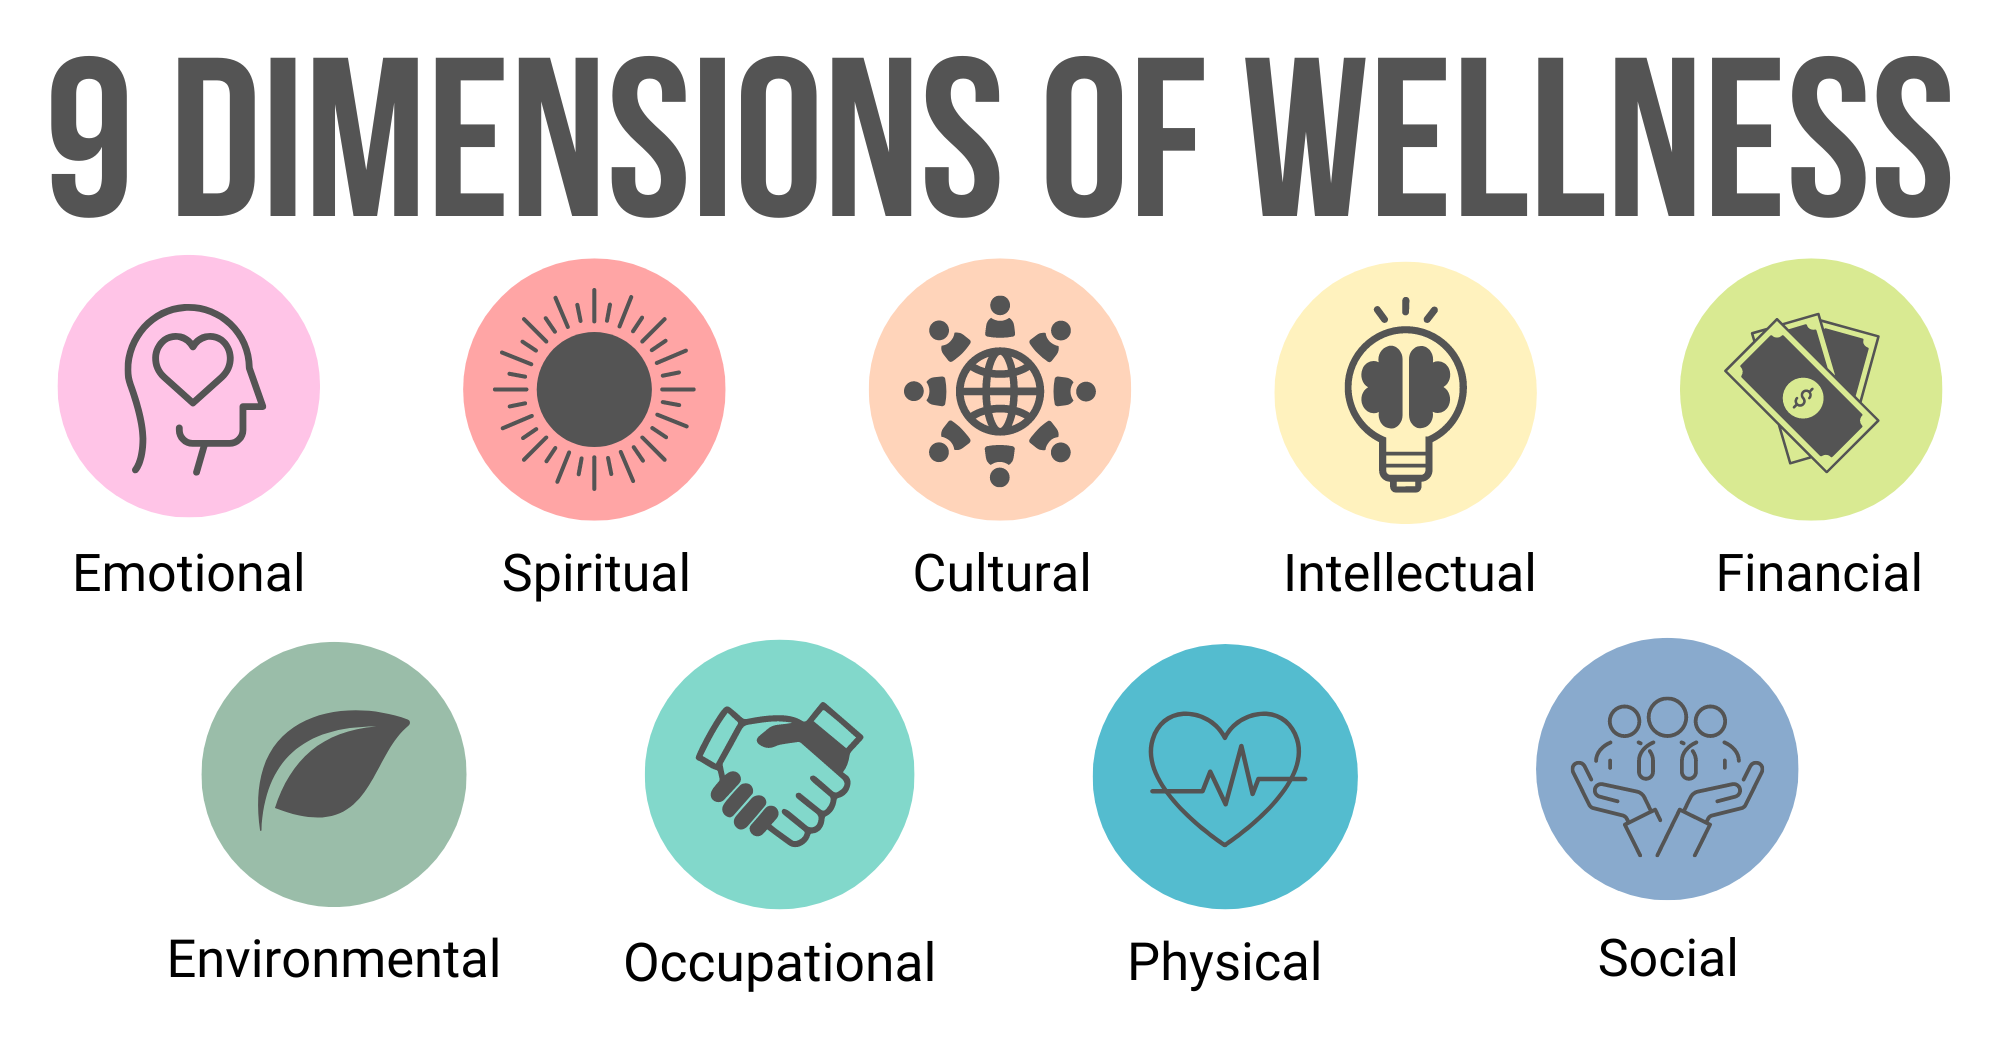 Graphic depicting the nine dimensions of wellness: emotional, spiritual, cultural, intellectual, financial, environmental, occupational, physical, and social. 